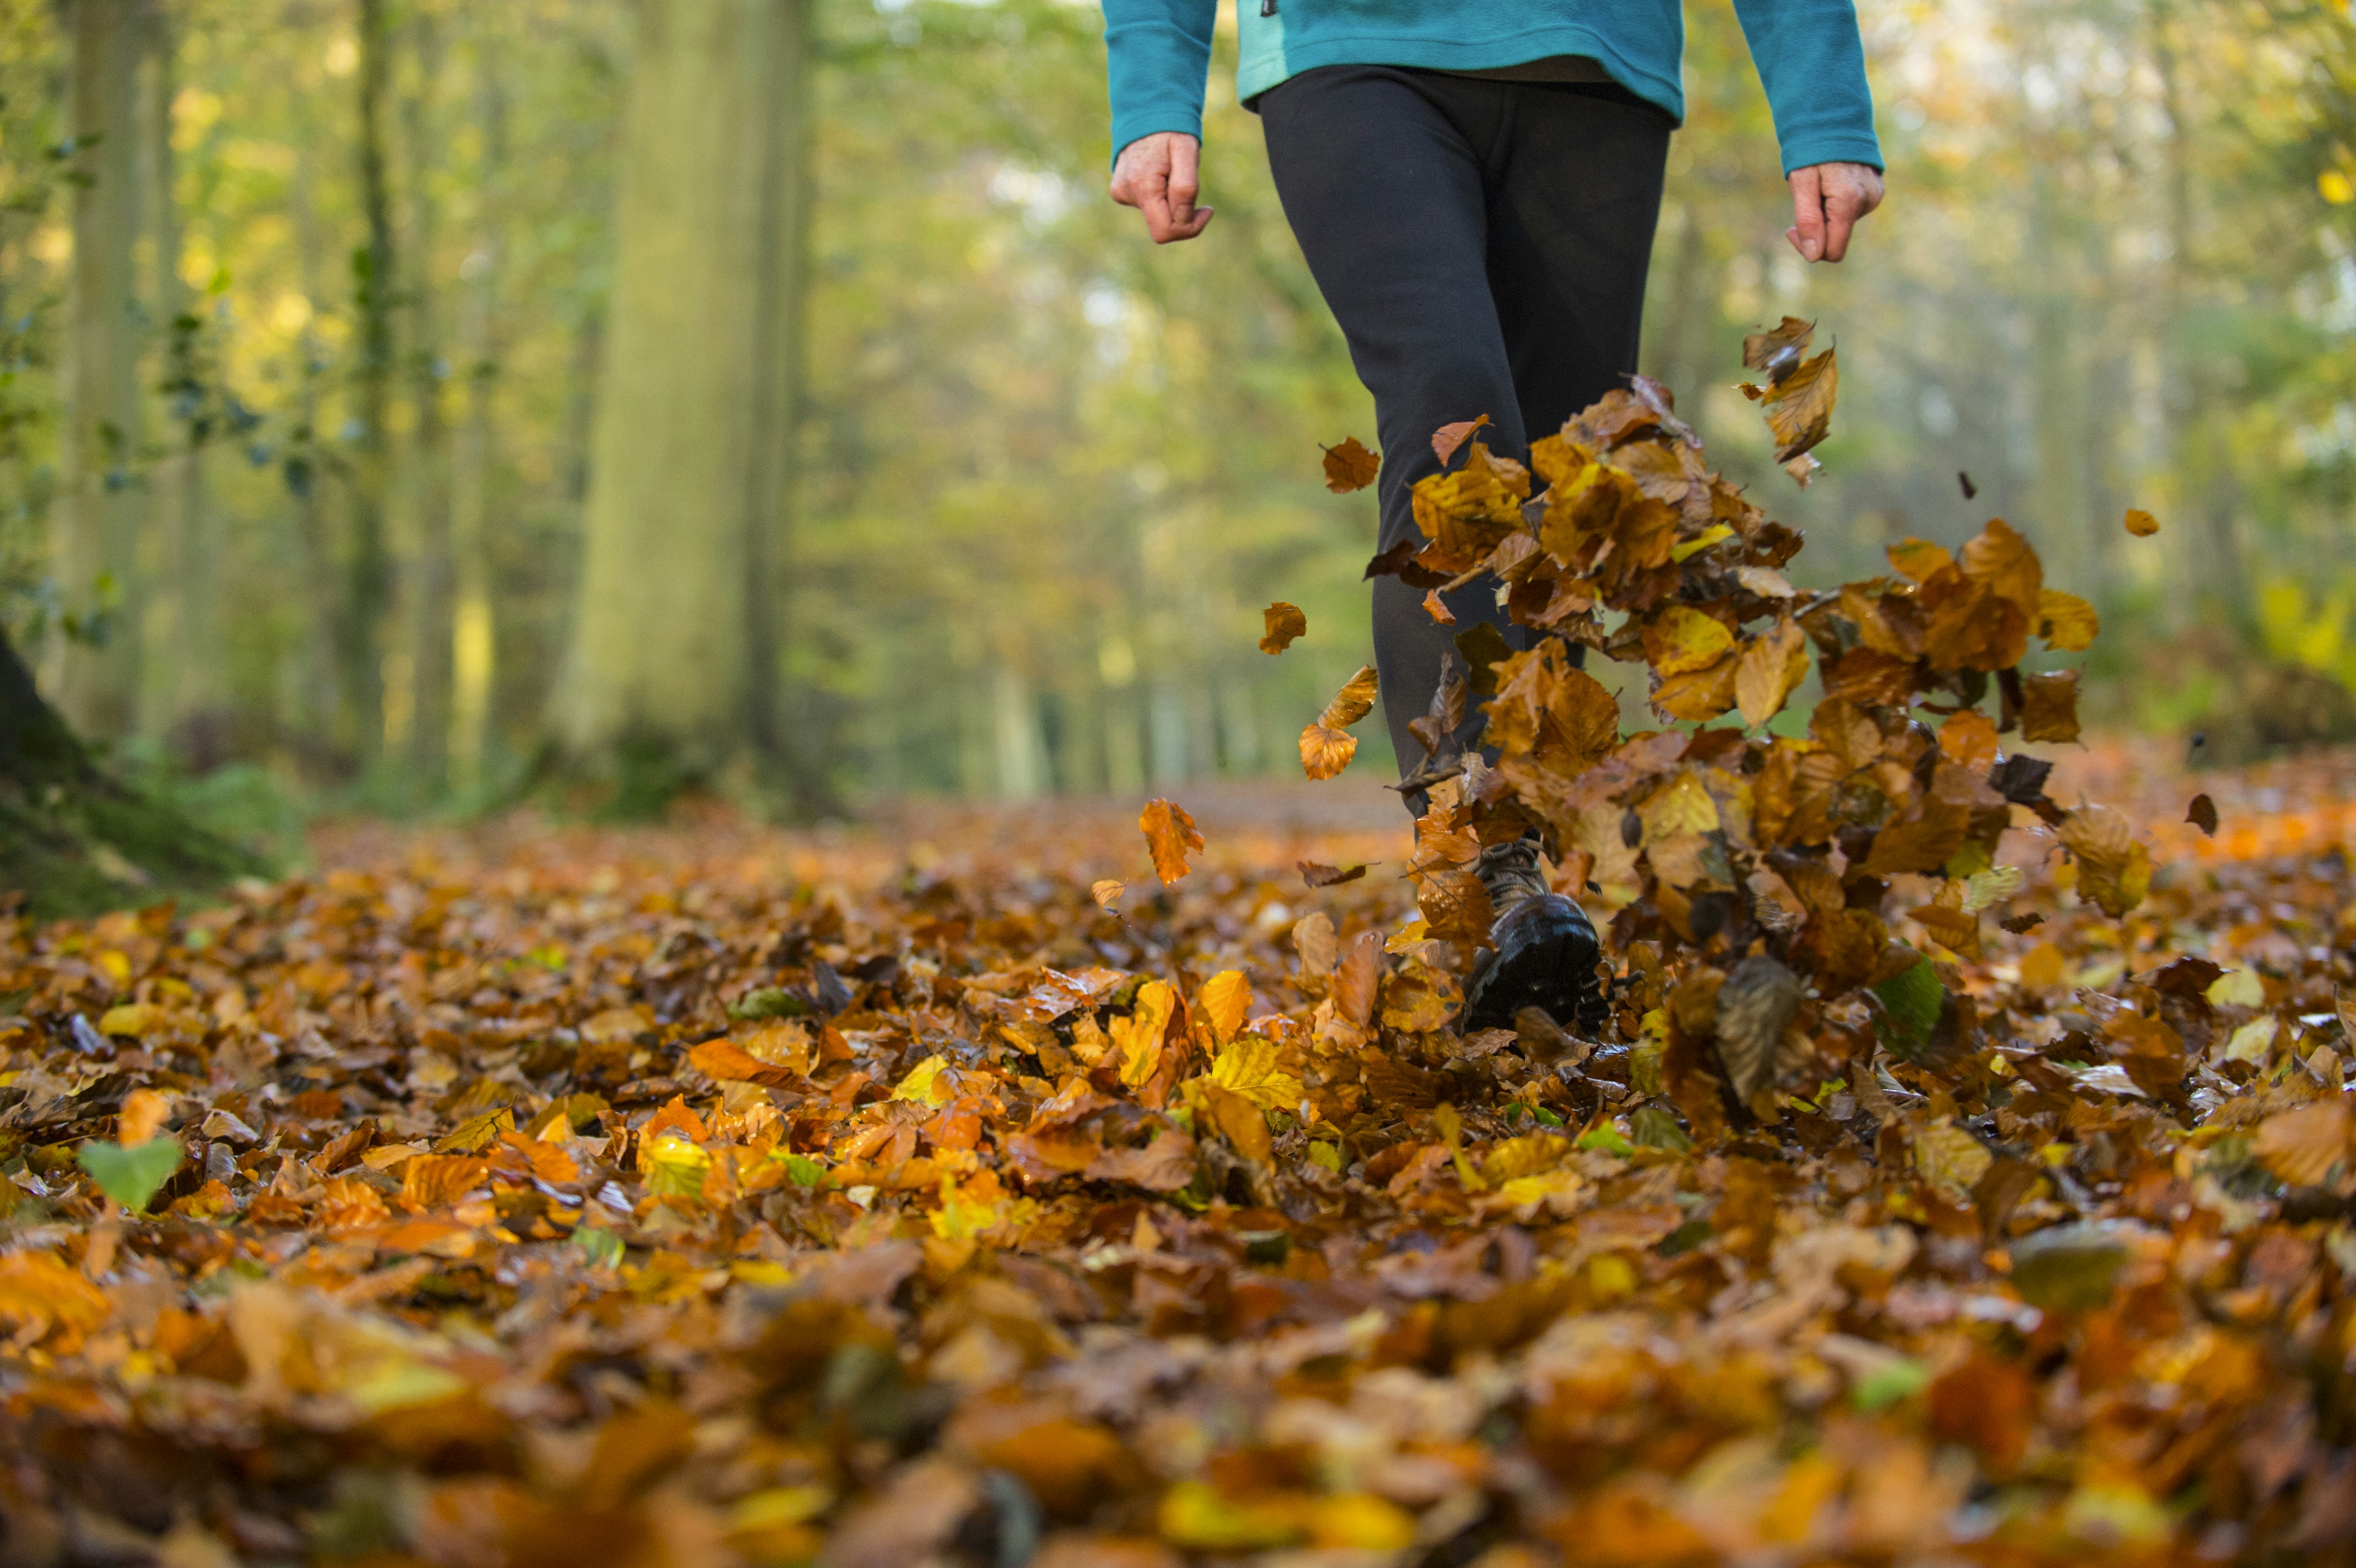 A woman walking and kicking up fallen leaves on a hike in the autumn 